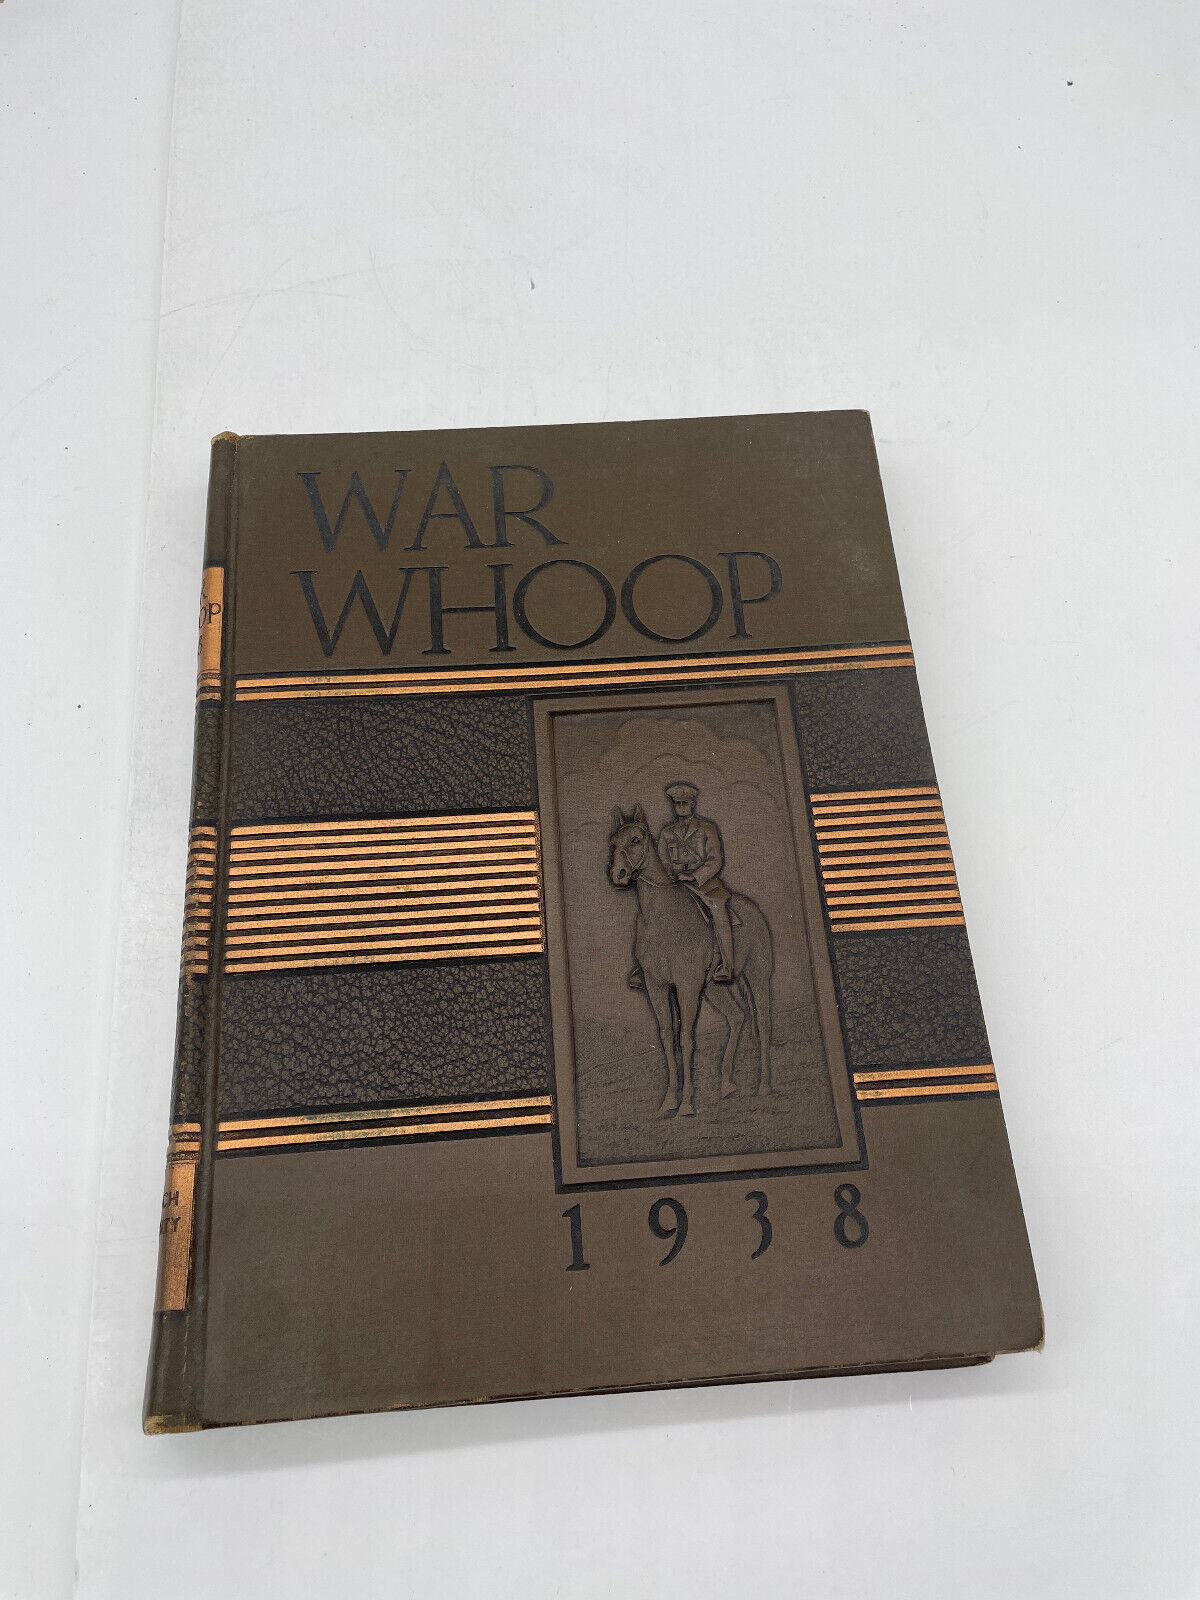 Norwich University WAR WHOOP Yearbook 1938 Norwich VT rare military